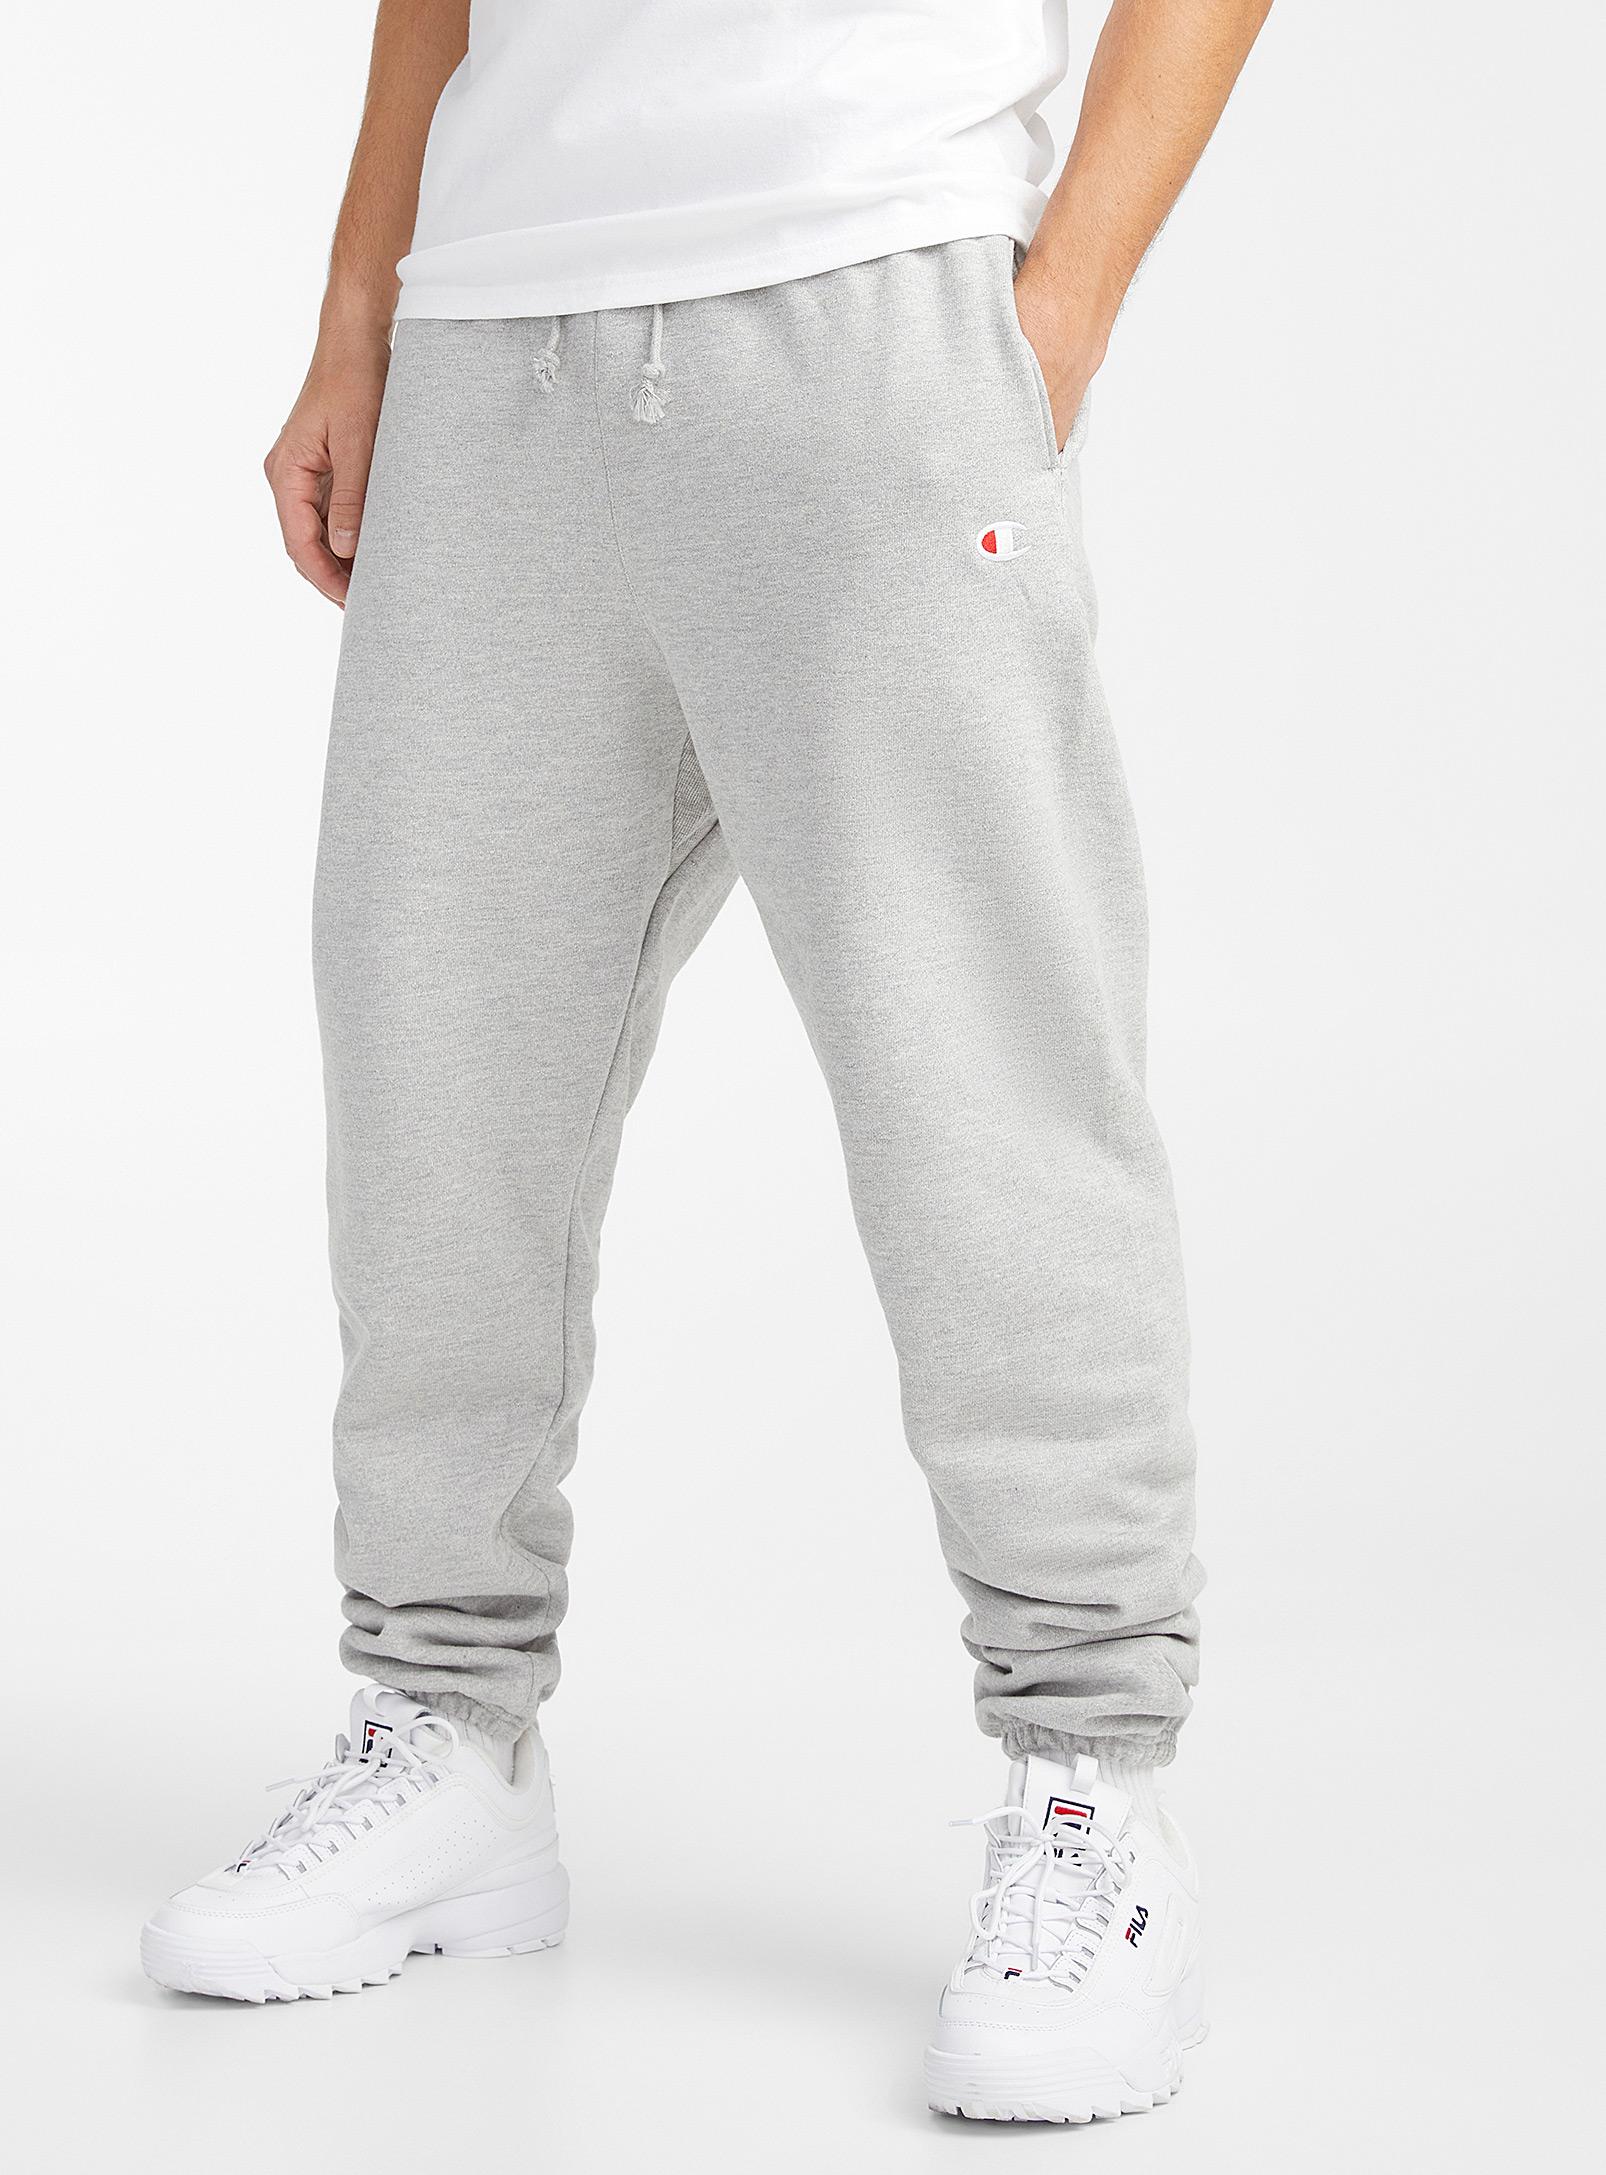 Faderlig overse Pump Champion Cotton Reverse Weave Loose joggers in Grey (Gray) for Men - Lyst